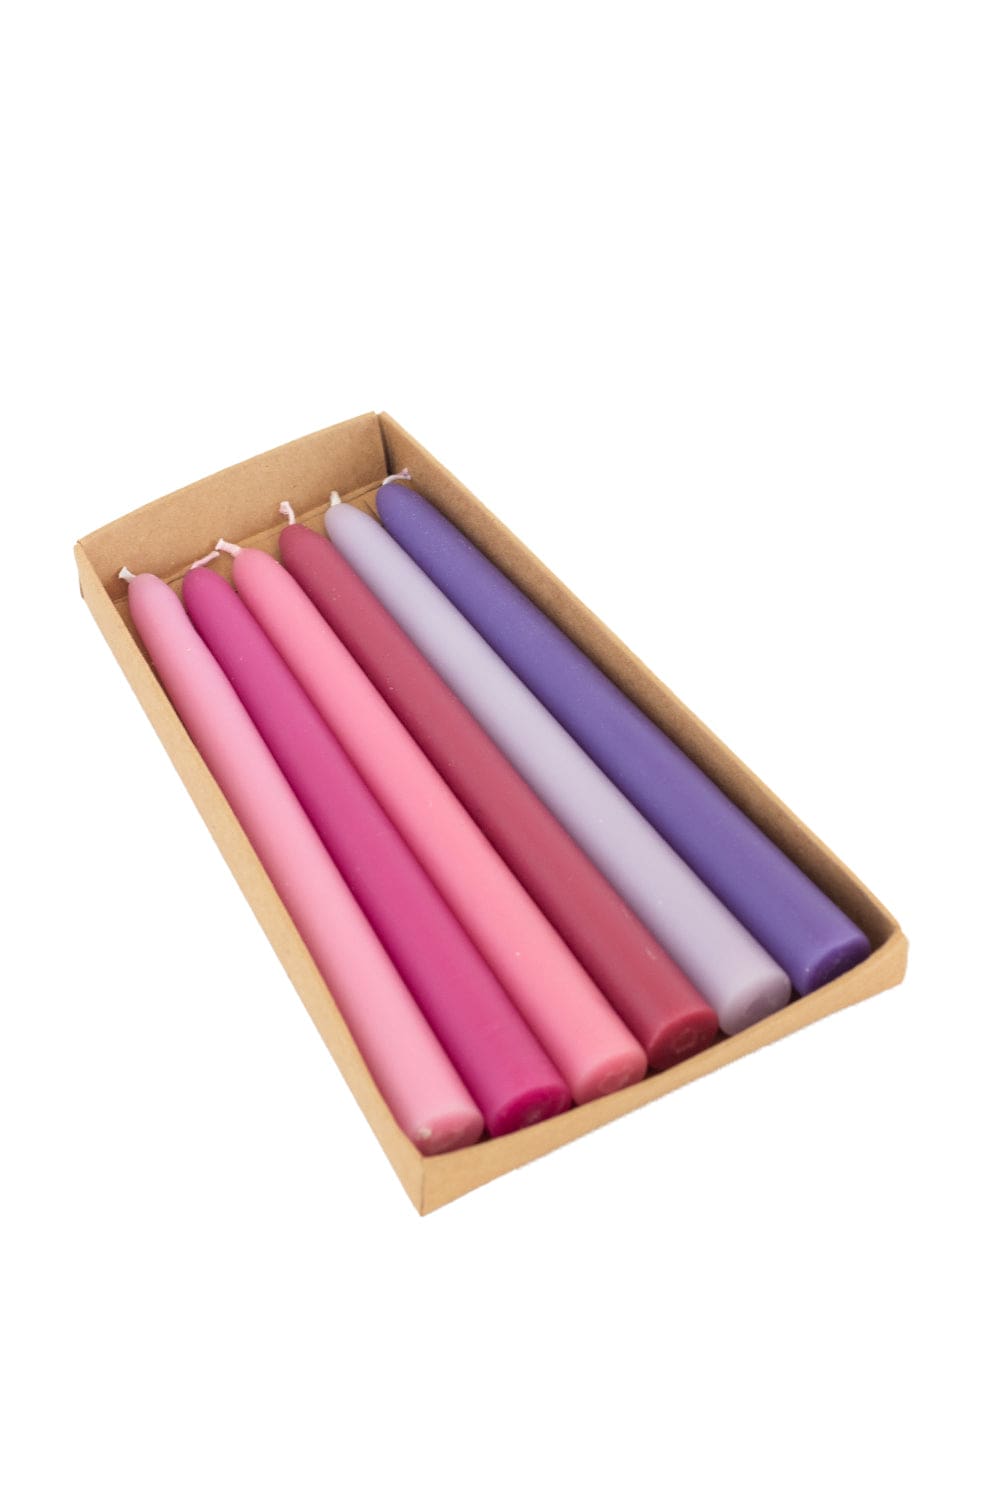 Pastel Dream Ombre Tapered Candles- Set of 6